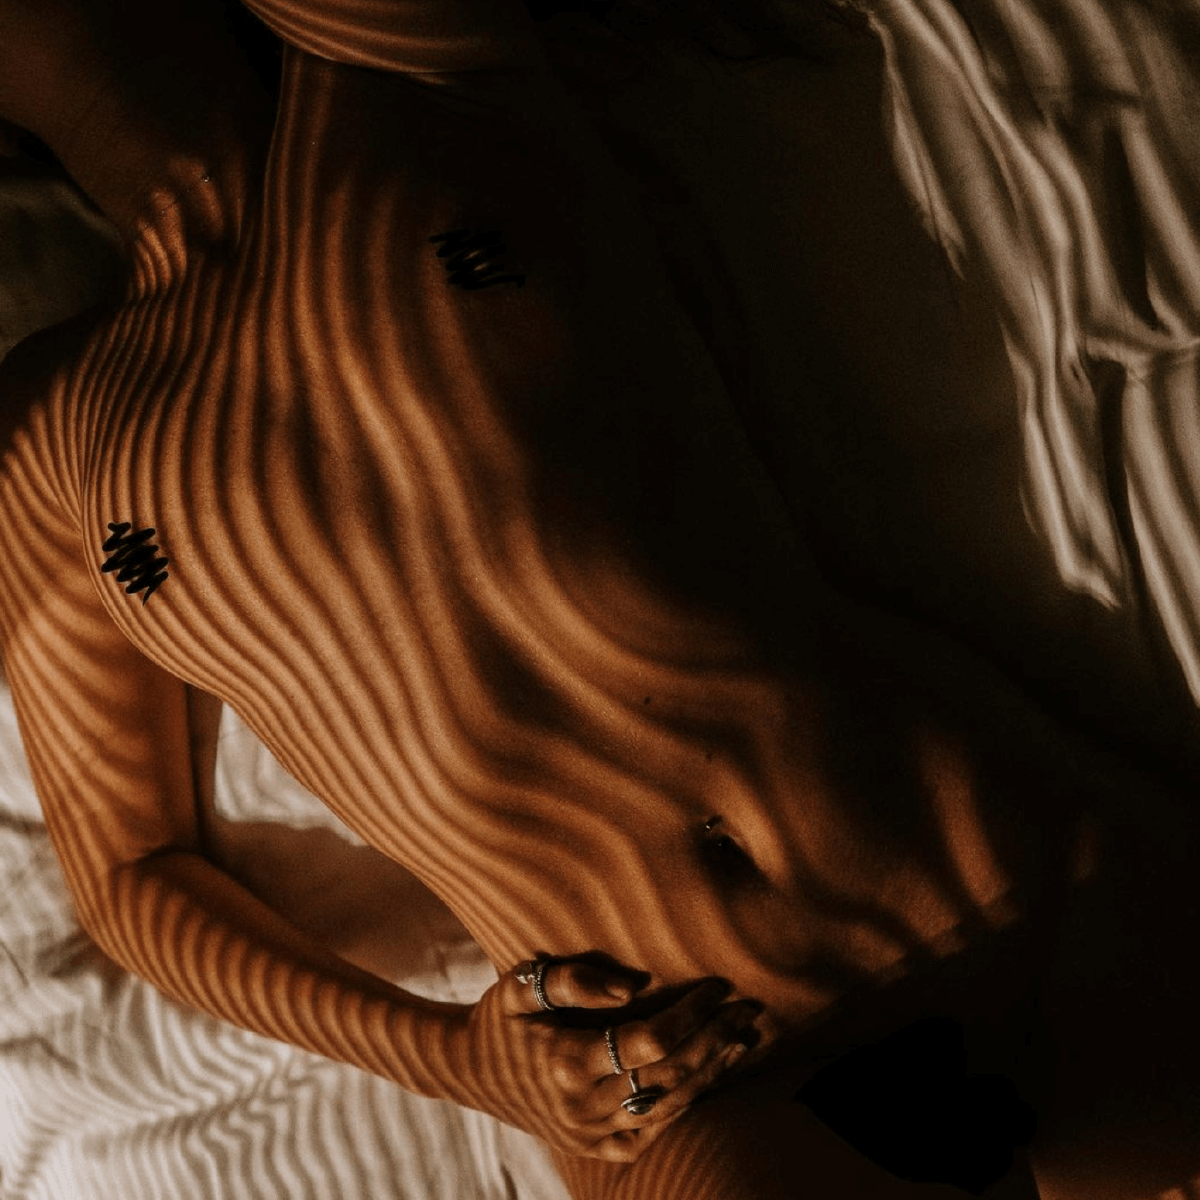 Woman lying down naked on bed